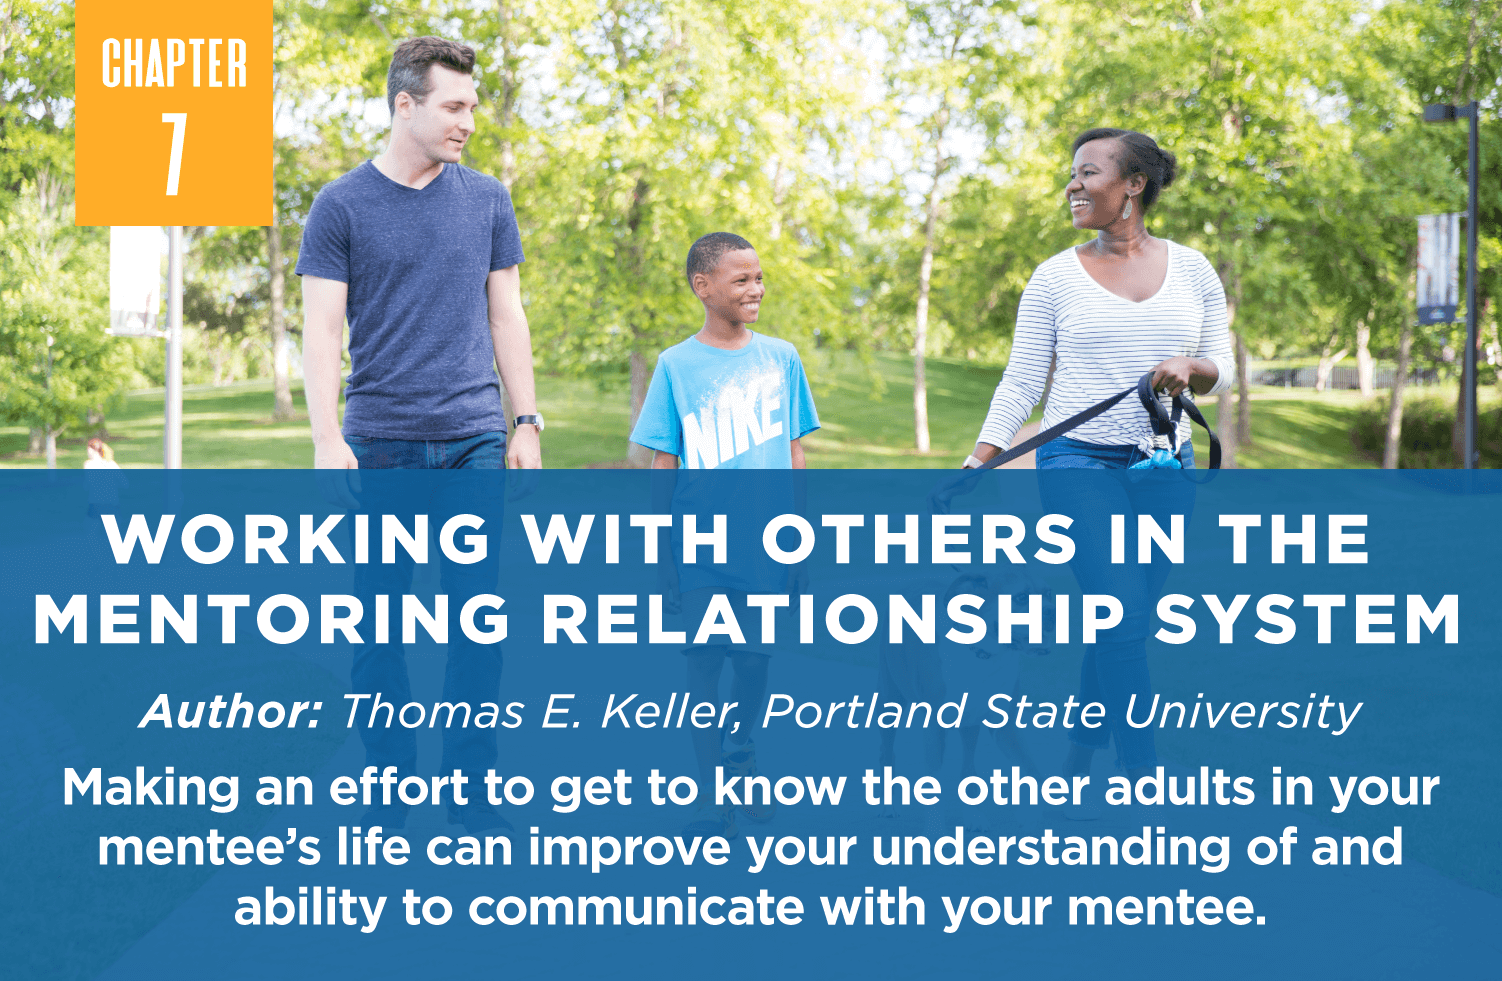 Working with Others in the 
Mentoring Relationship System
Author: Thomas E. Keller, Portland State University
Making an effort to get to know the other adults in your mentee’s life can improve your understanding of and ability to communicate with your mentee.